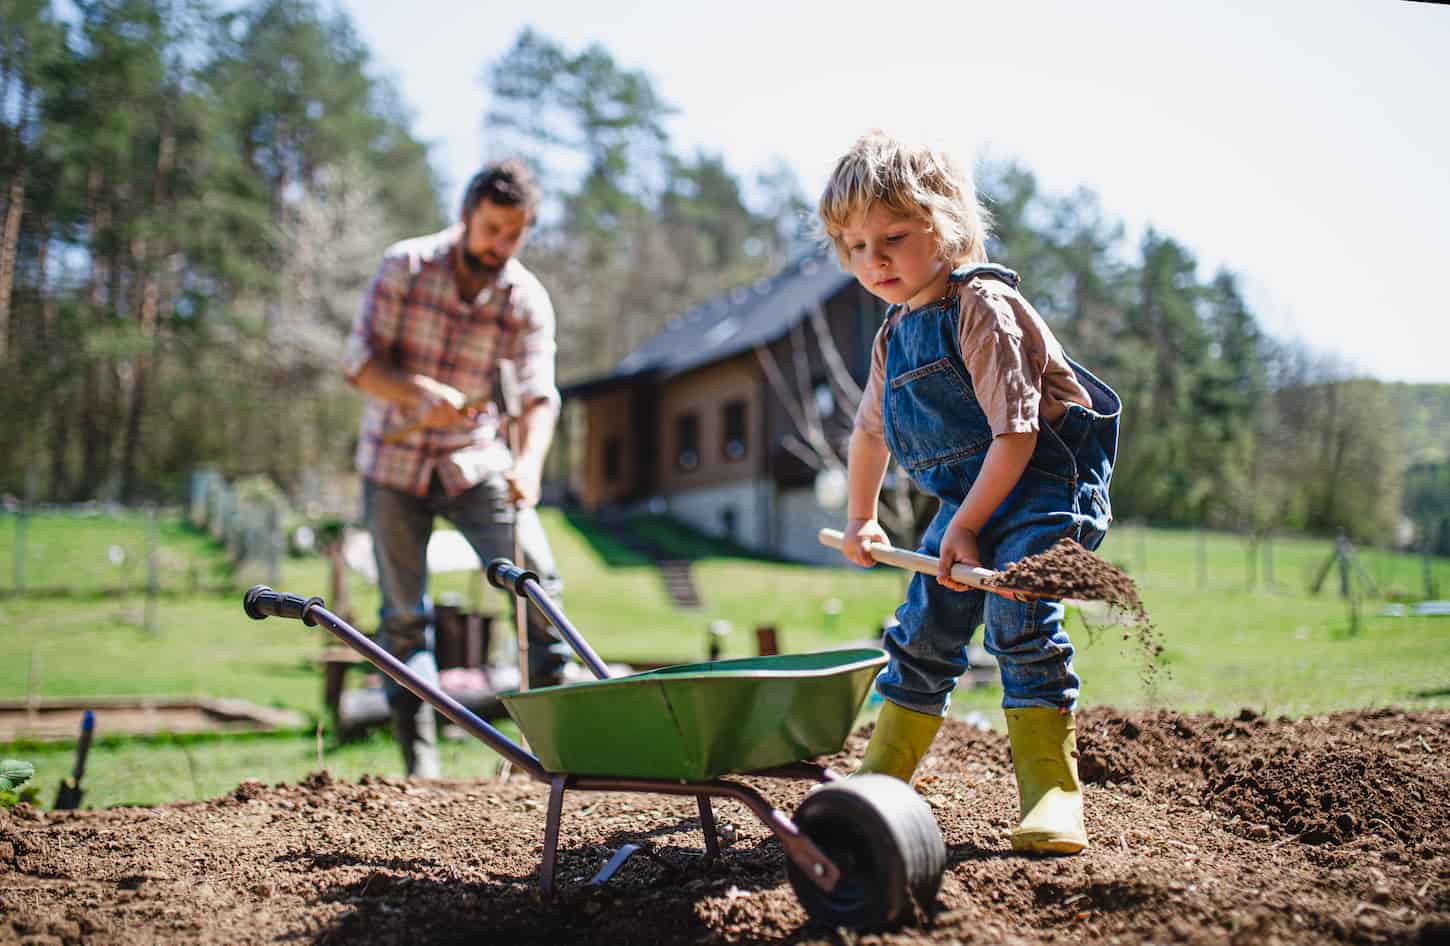 An image of a Father with a small son working outdoors in the garden, a sustainable lifestyle concept